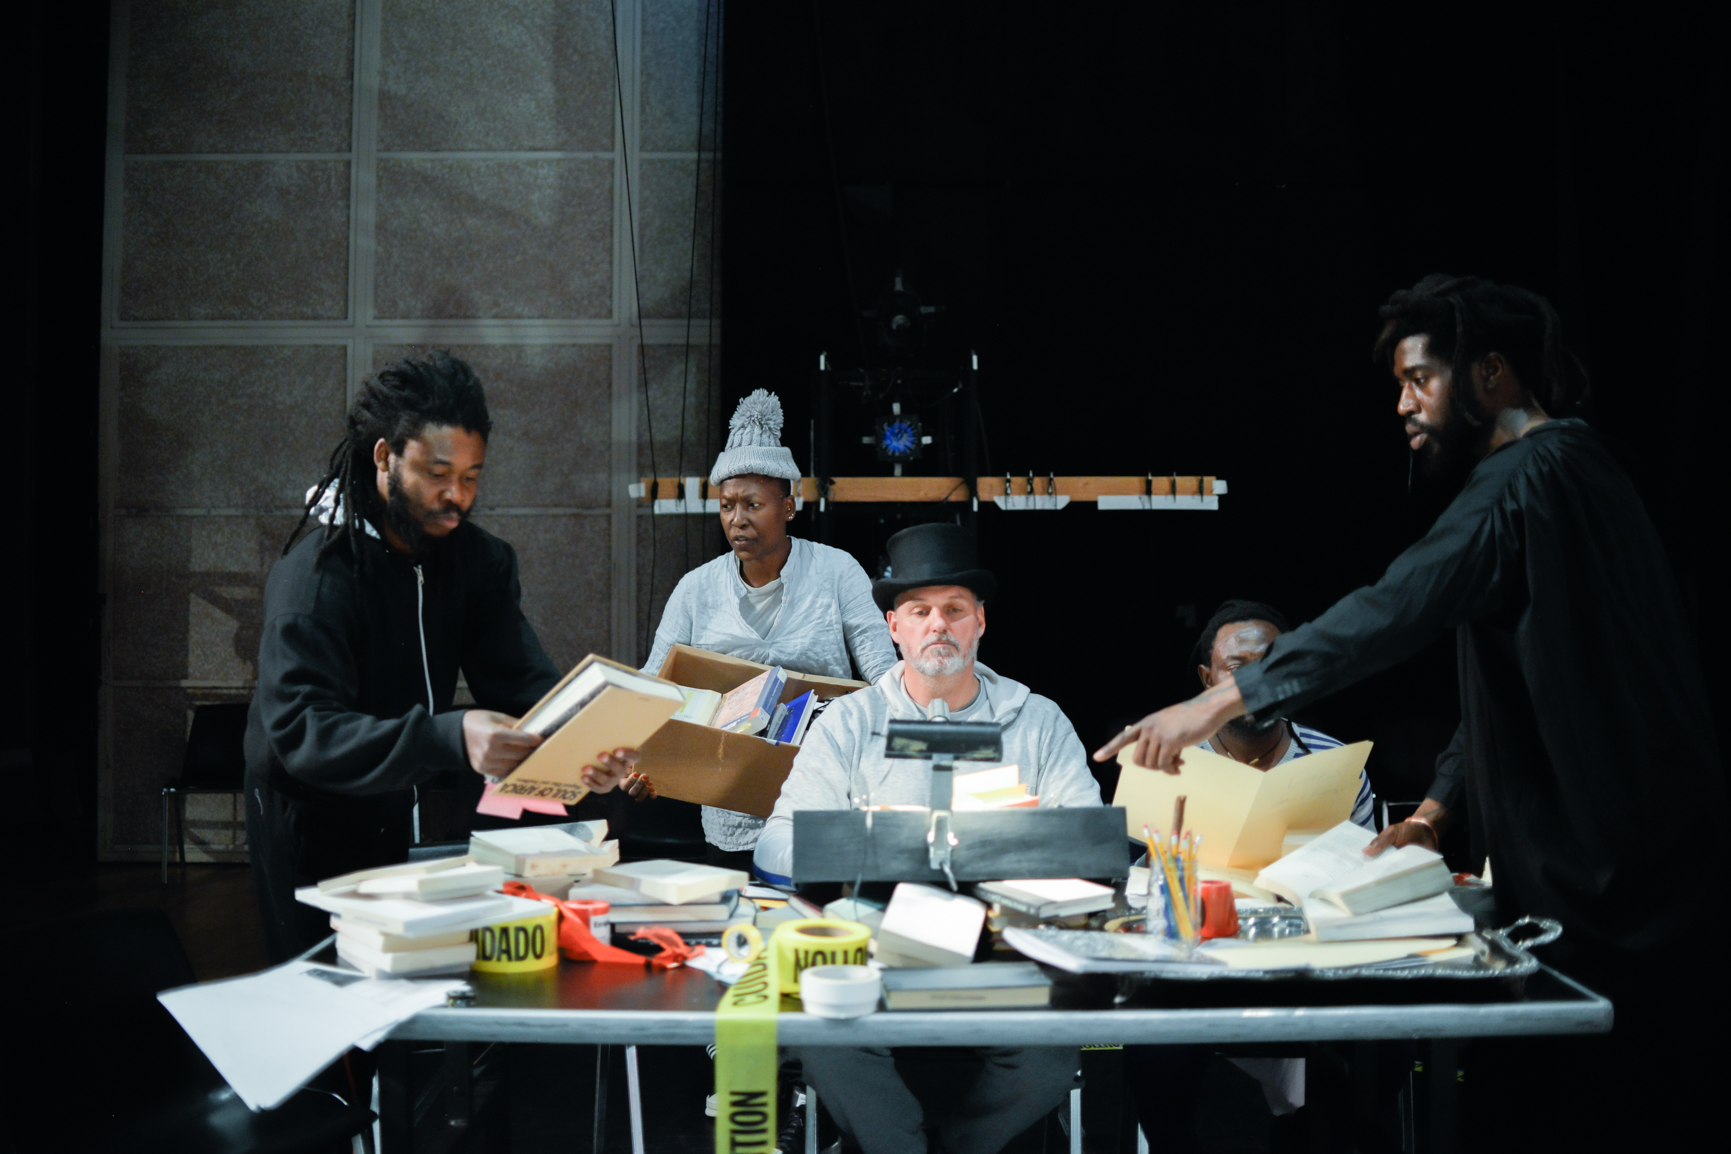 a white man in a top hat and four black people interact with a cluttered table